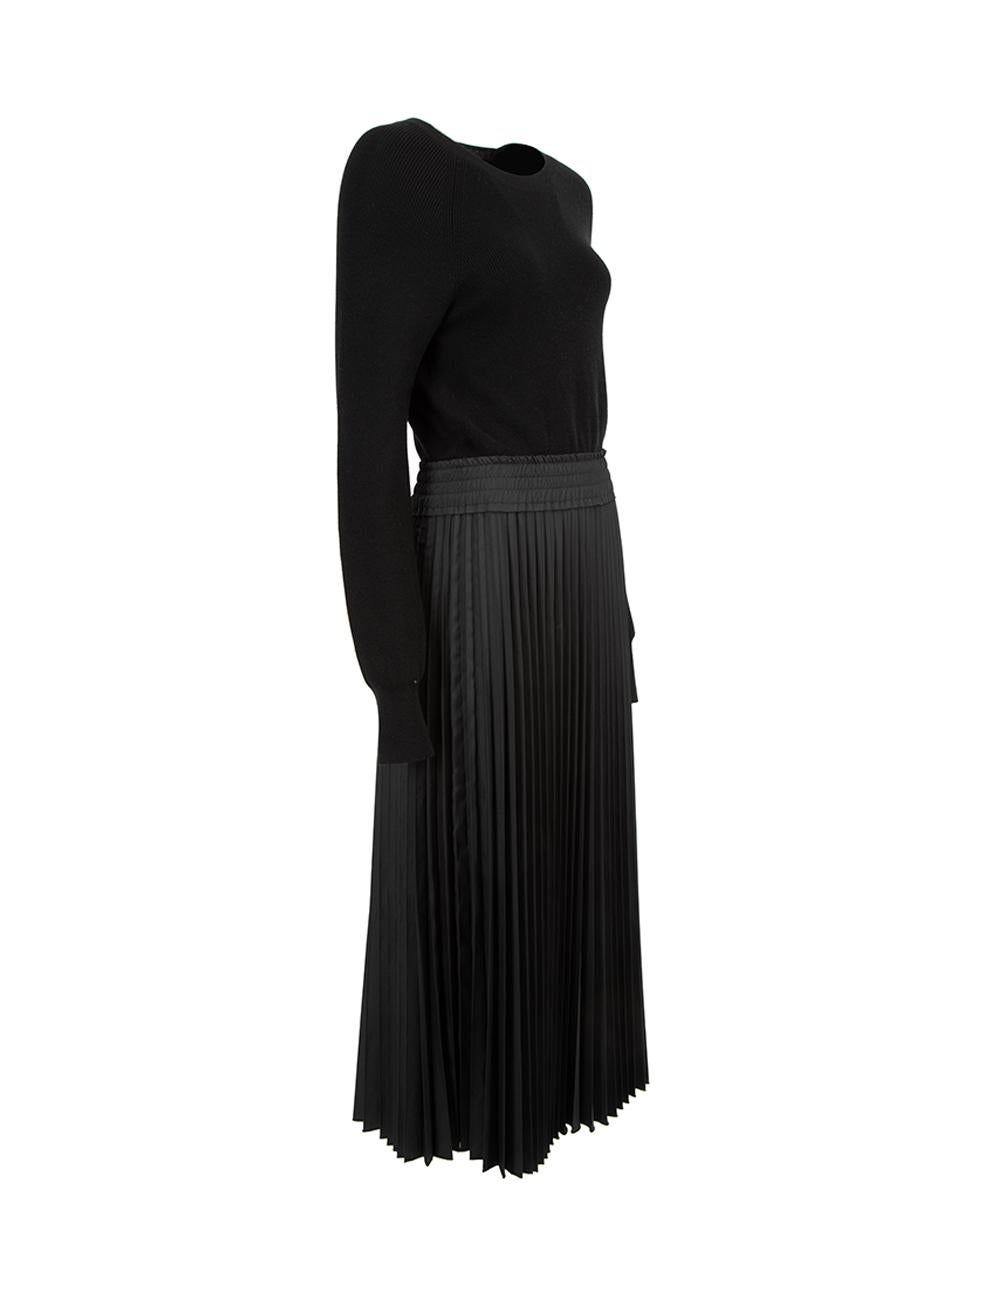 CONDITION is Never Worn. No visible wear to dress is evident on this used Moncler designer resale item.   Details  Black Wool Midi dress Knit long sleeves top Round neckline Pleated skirt Elasticated waistband and belted   Made in Romania 